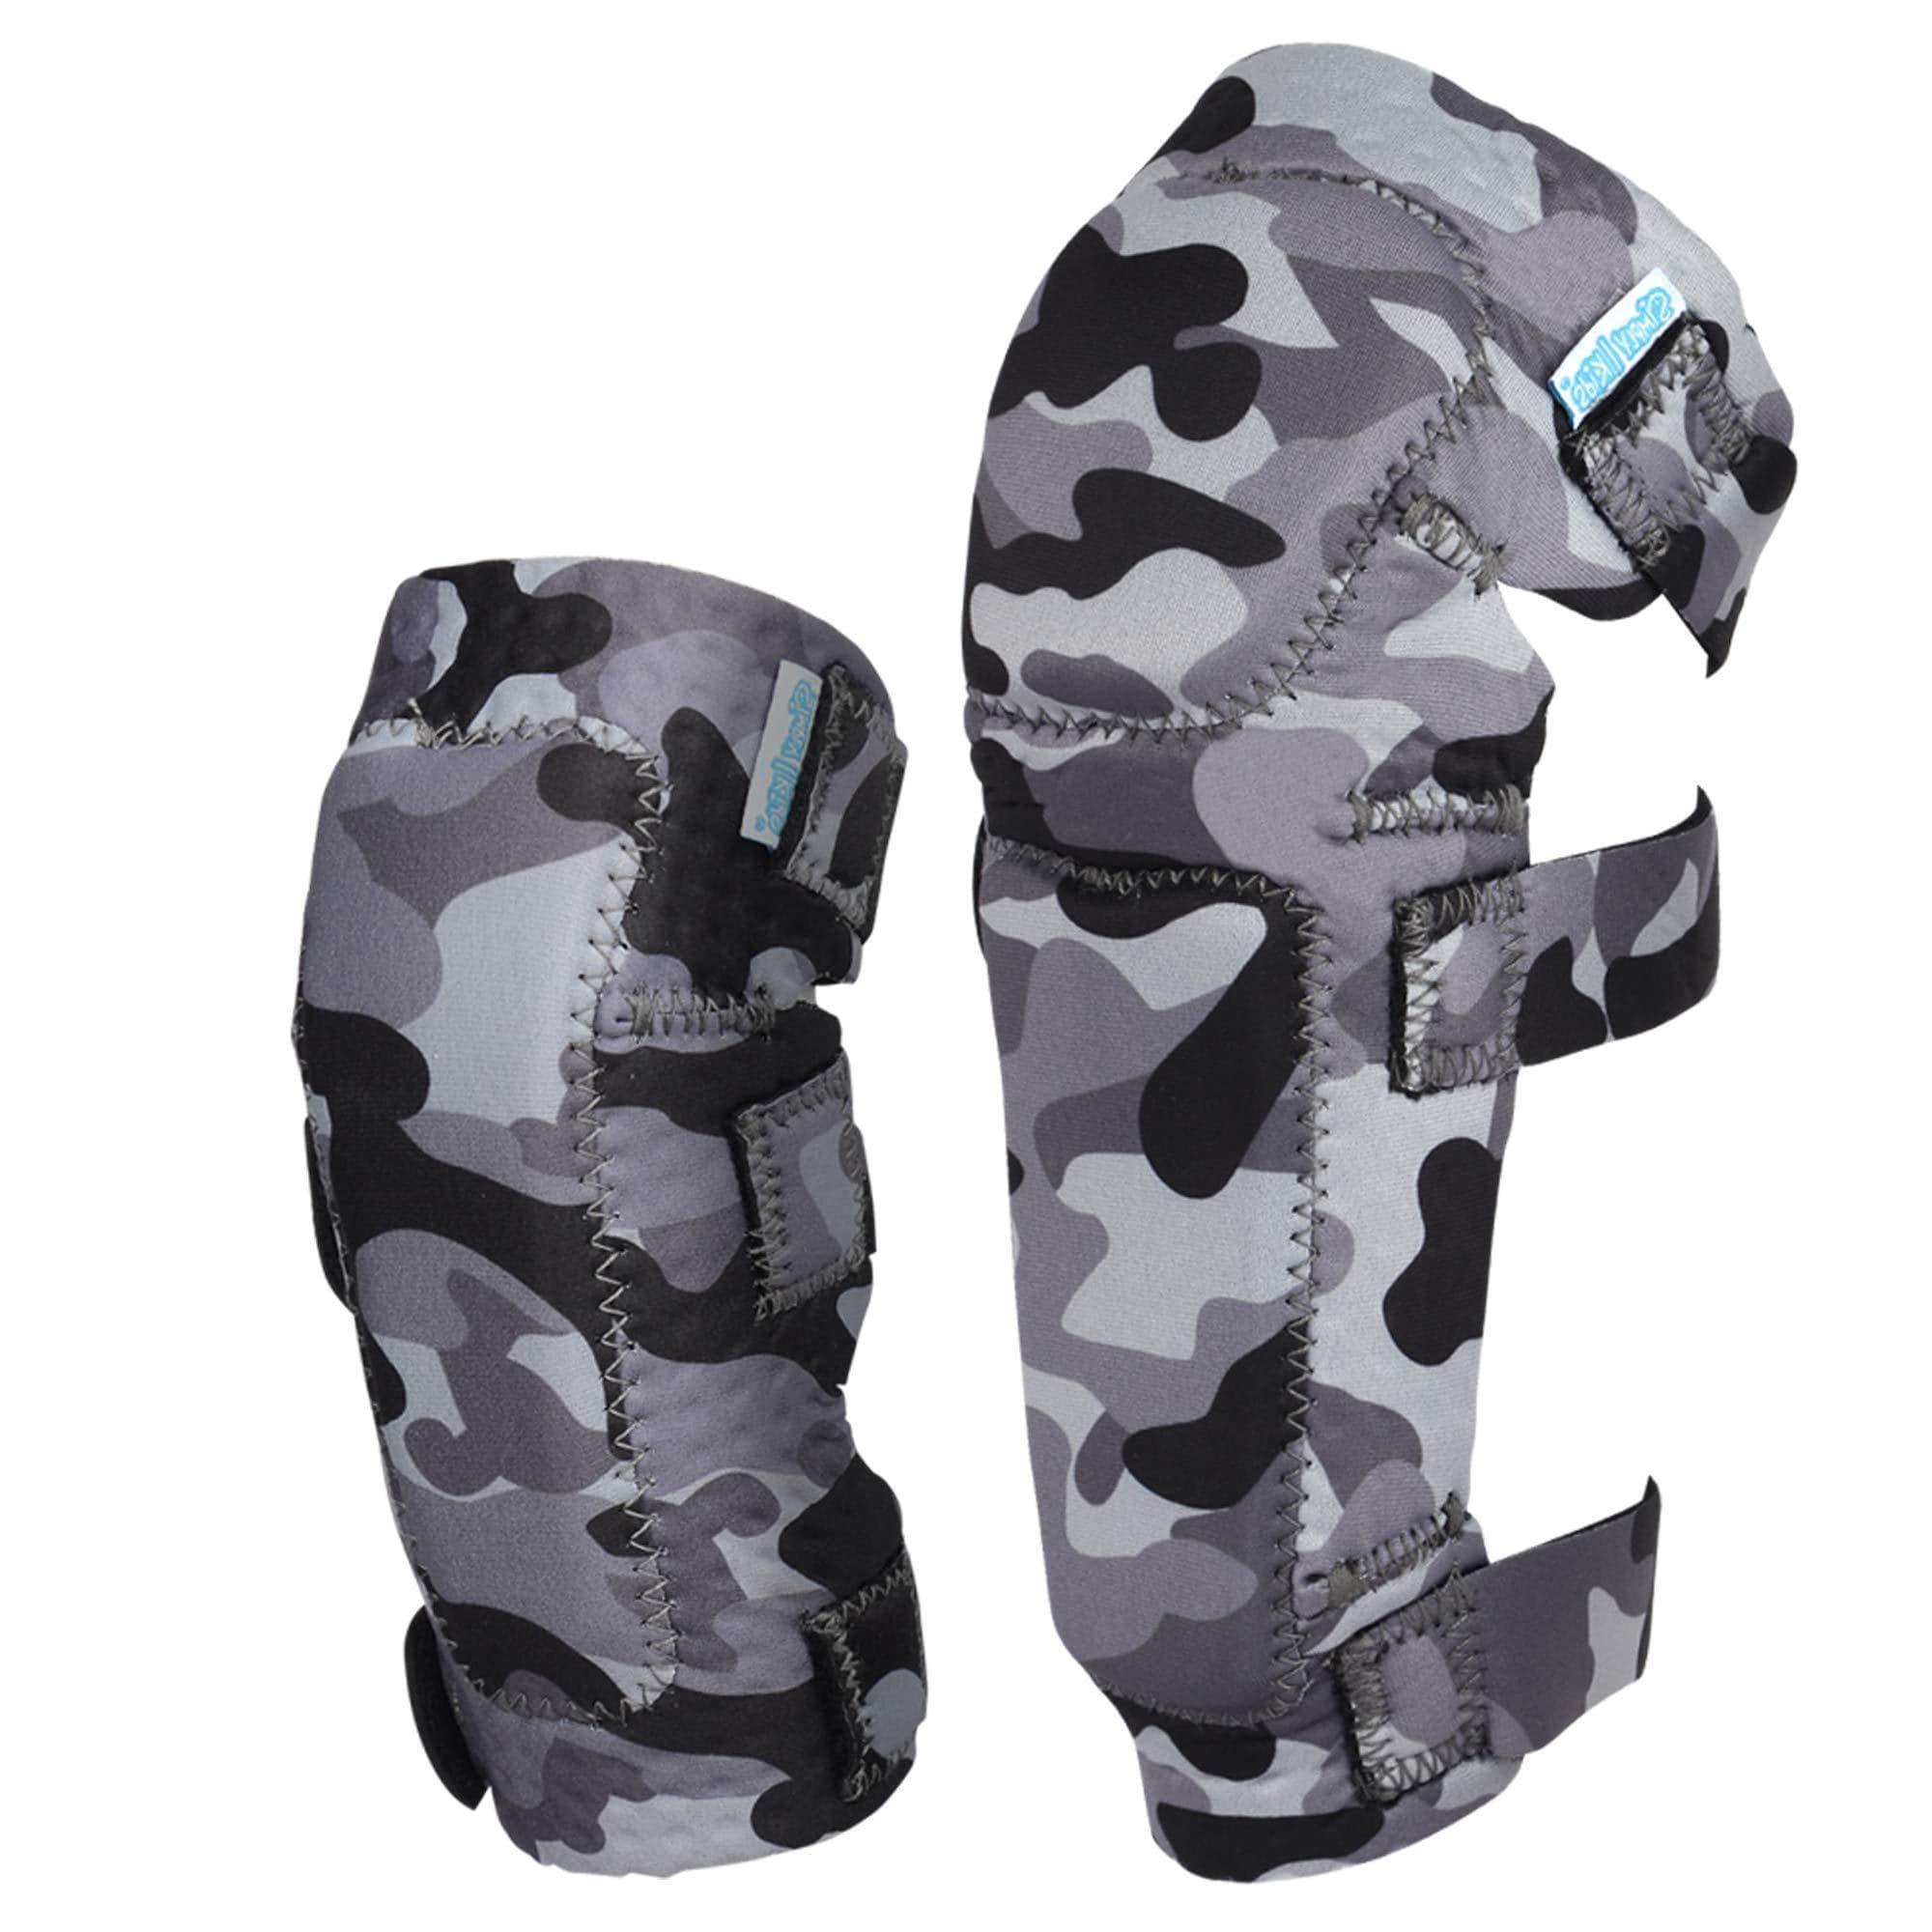 (Snow Camo) 2nd Gen - Innovative Soft Kids Knee Pads and Elbow Pads with Bike Gloves - Simply Kids